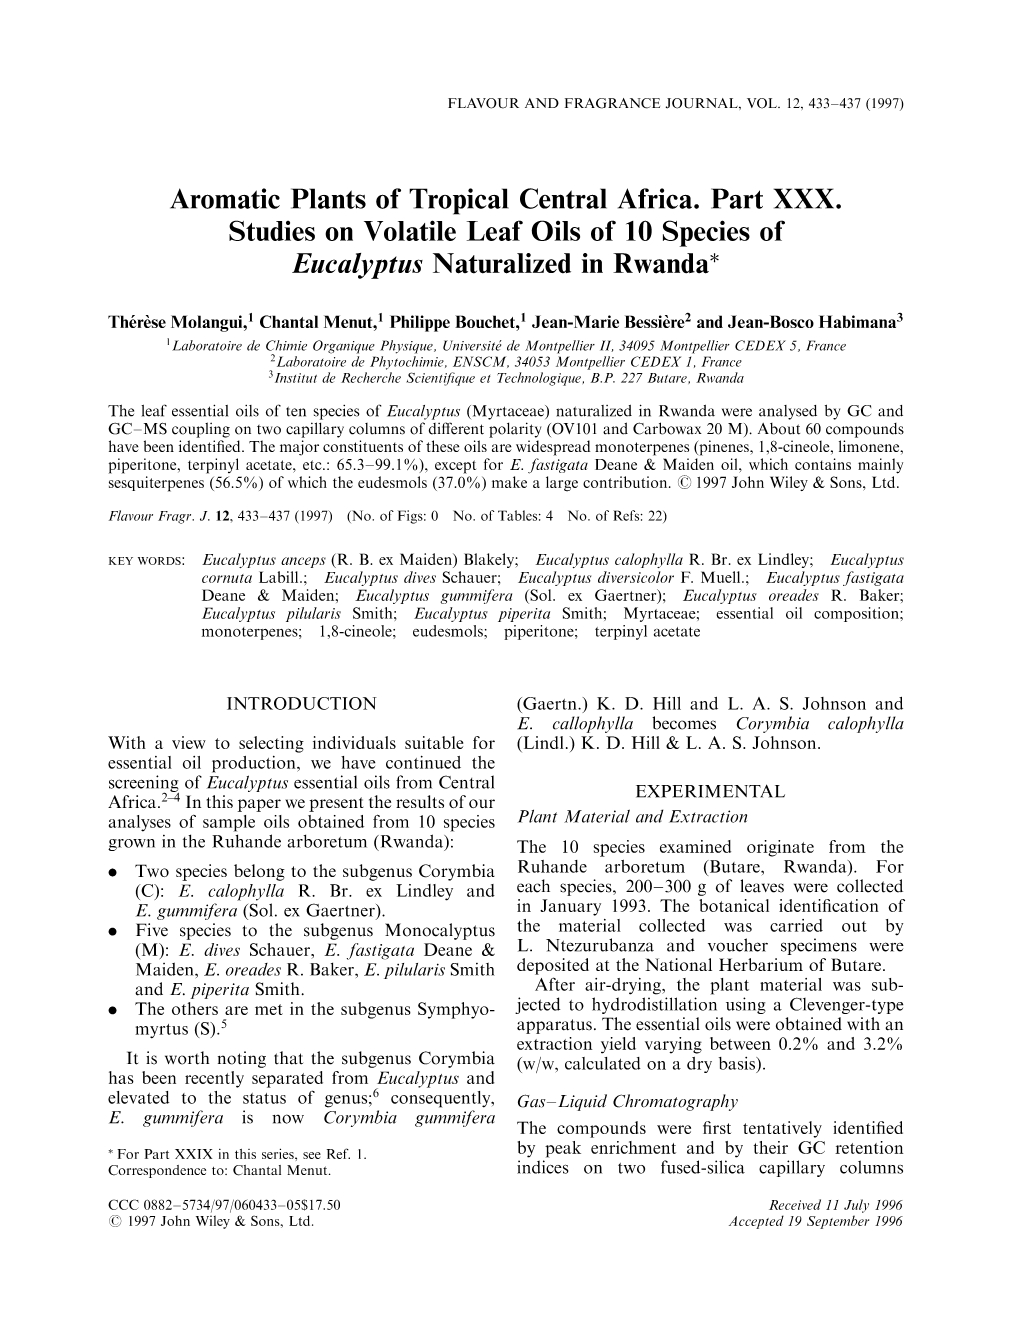 Aromatic Plants of Tropical Central Africa. Part XXX. Studies on Volatile Leaf Oils of 10 Species of Eucalyptus Naturalized in Rwandaã